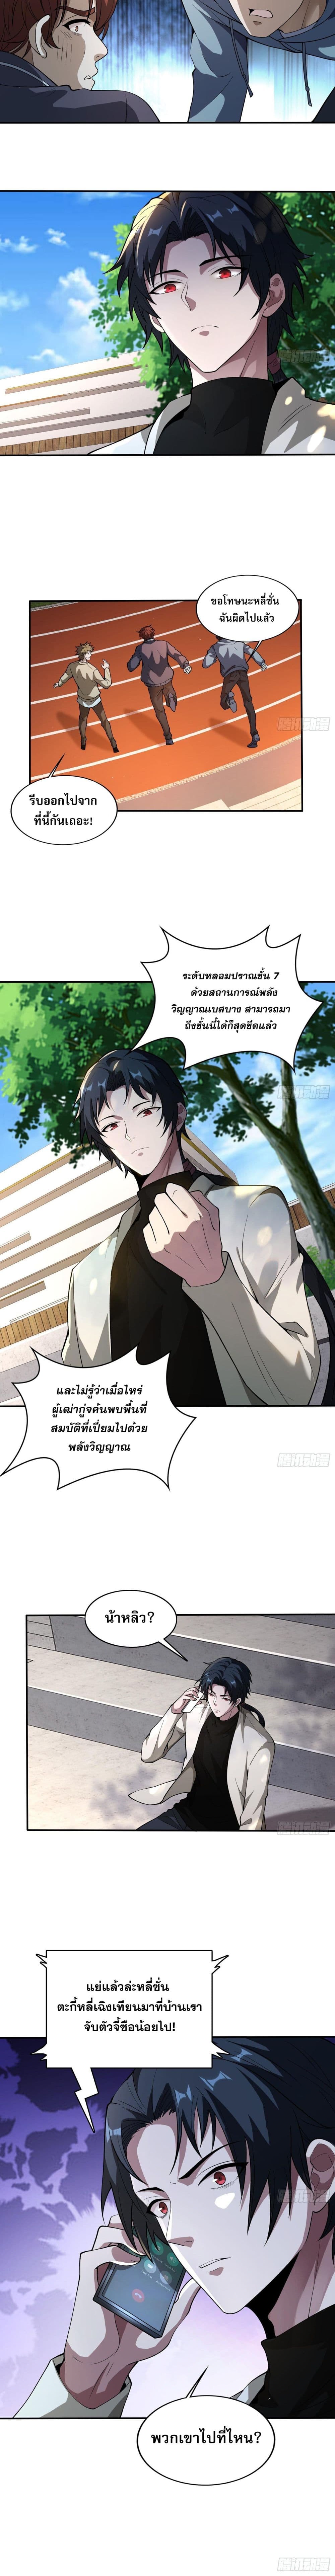 The All-Knowing Cultivator ผู้ฝึกตนผู้รอบรู้ 3/10